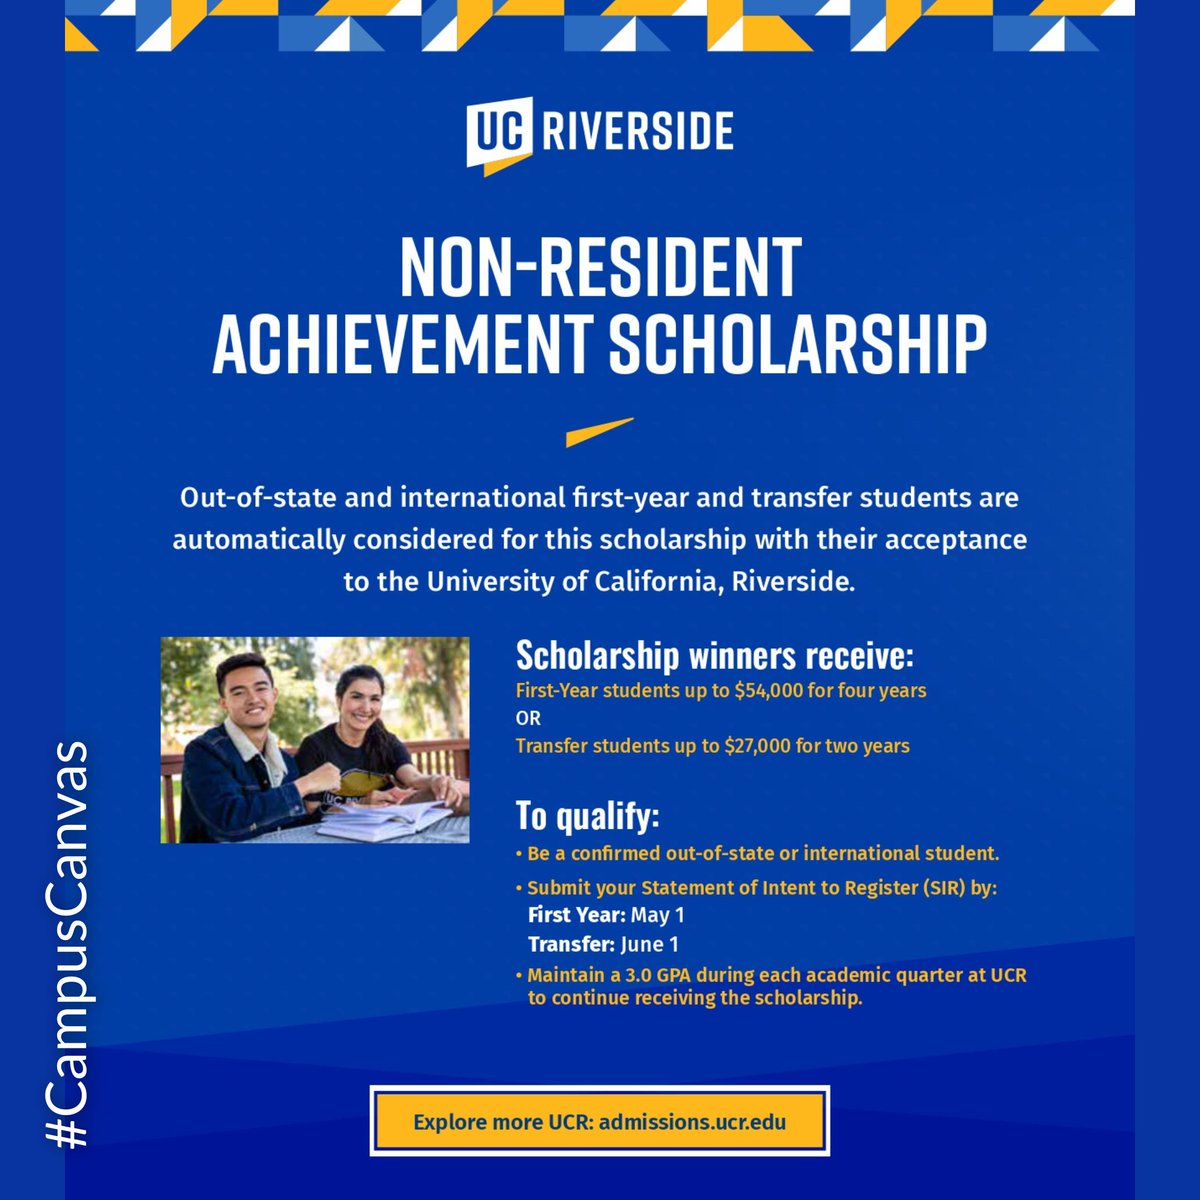 University of California Riverside: Ranked in the *top 15 public universities*, and 2nd in social mobility. *UCR offers MERIT SCHOLARSHIP up to $54k for 4 years* to International Students? Find out more here, and complete your *UC Application* before the *deadline - Nov 30th*